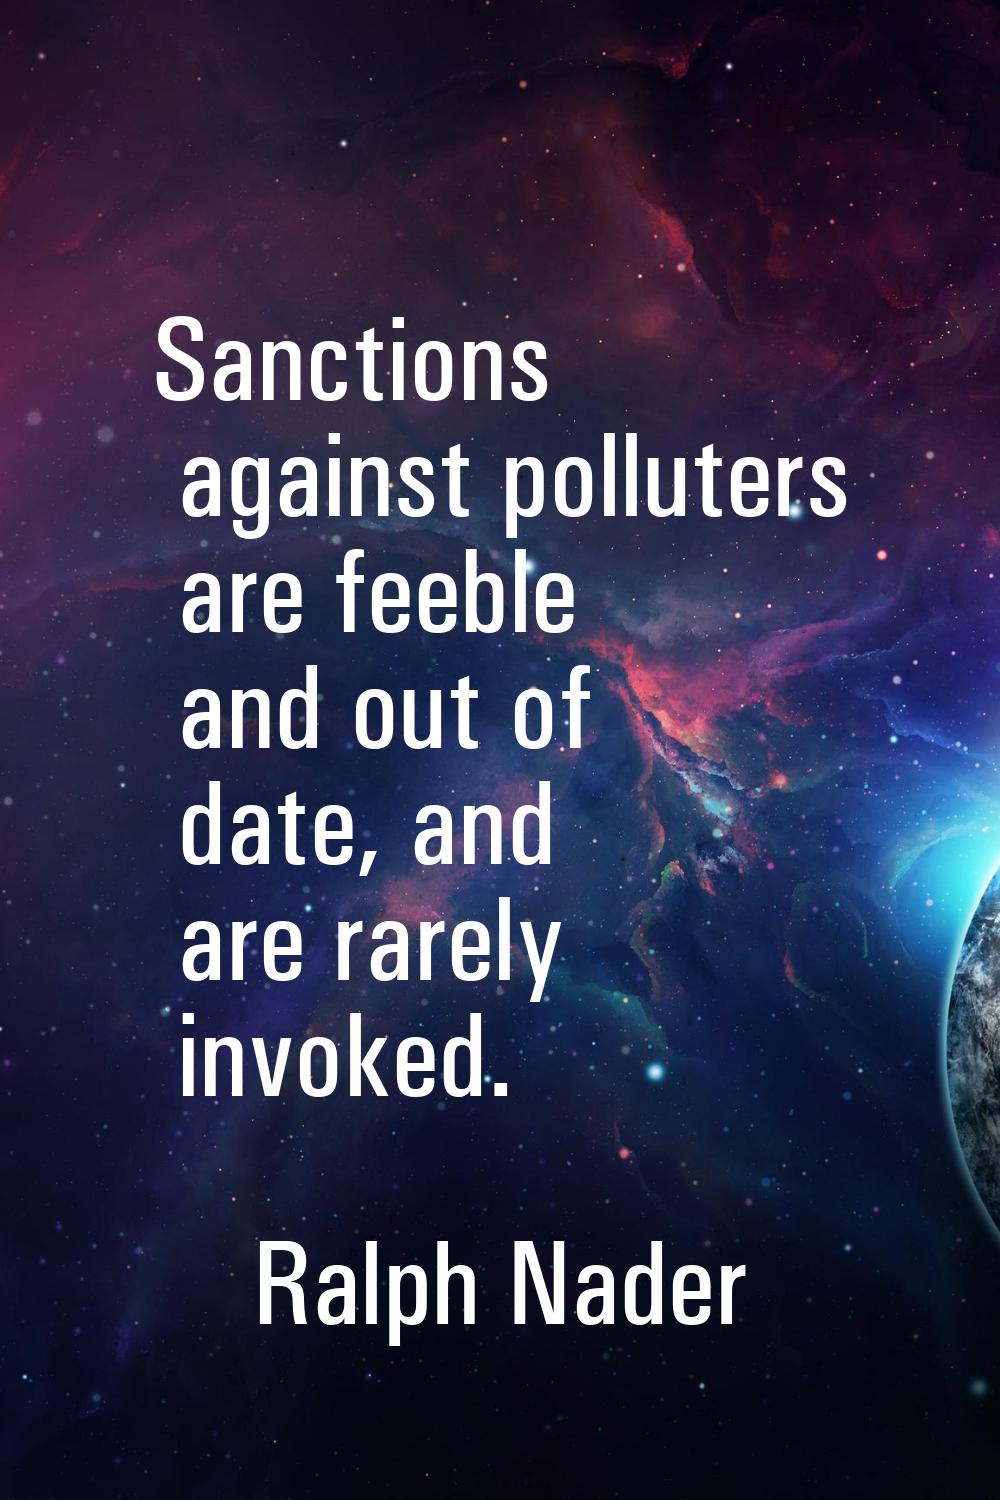 Sanctions against polluters are feeble and out of date, and are rarely invoked.